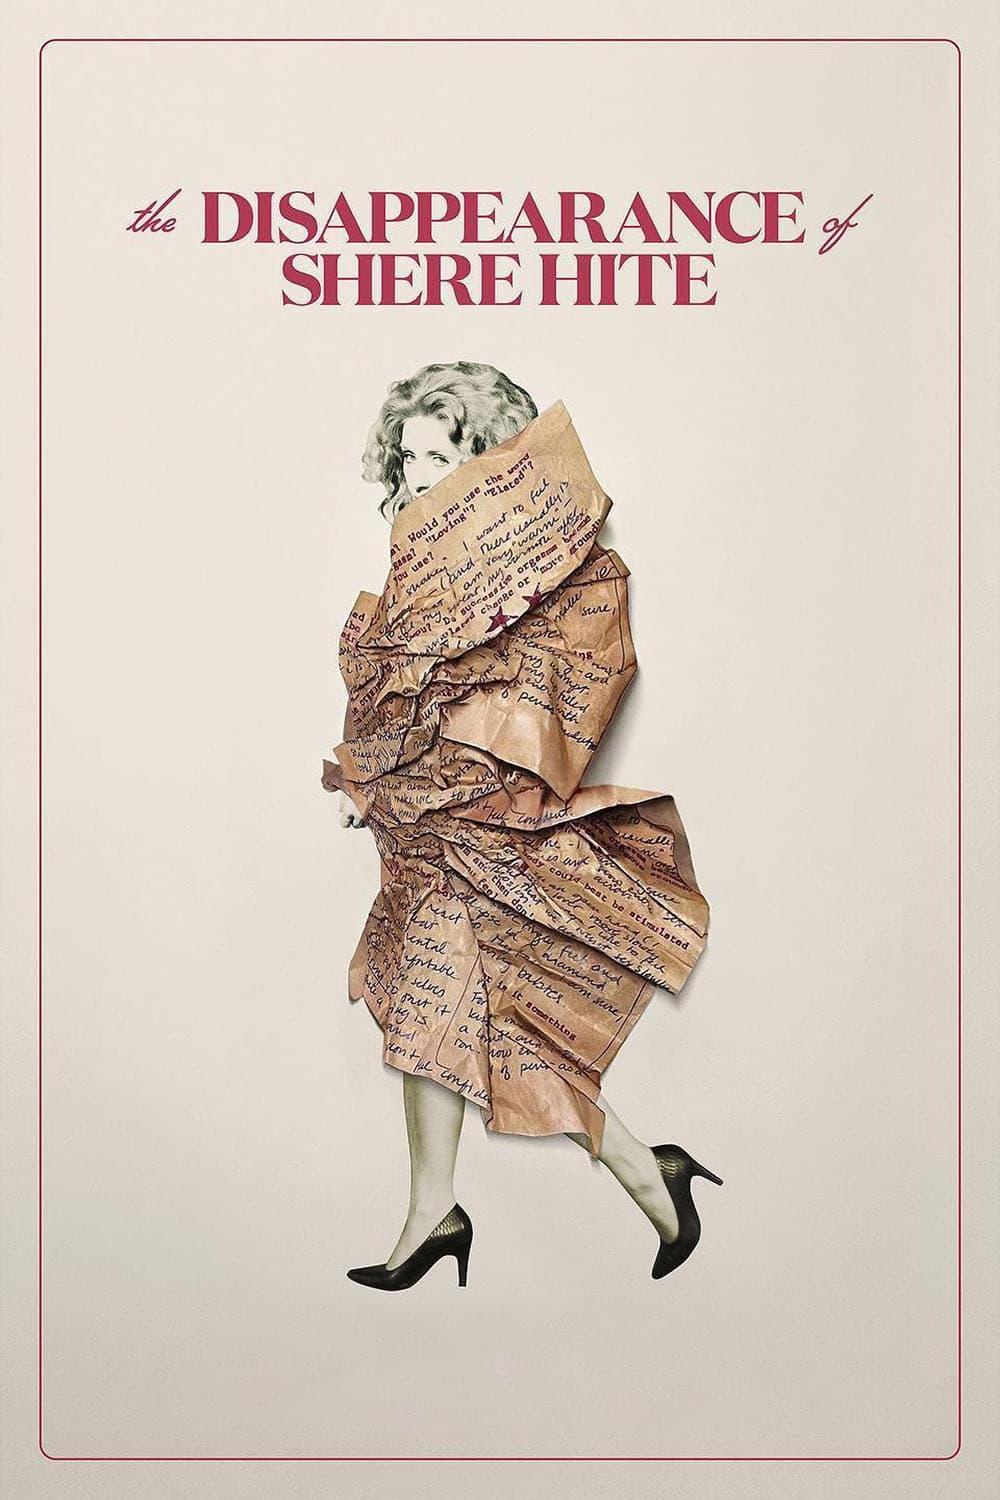 The Disappearance of Shere Hite poster